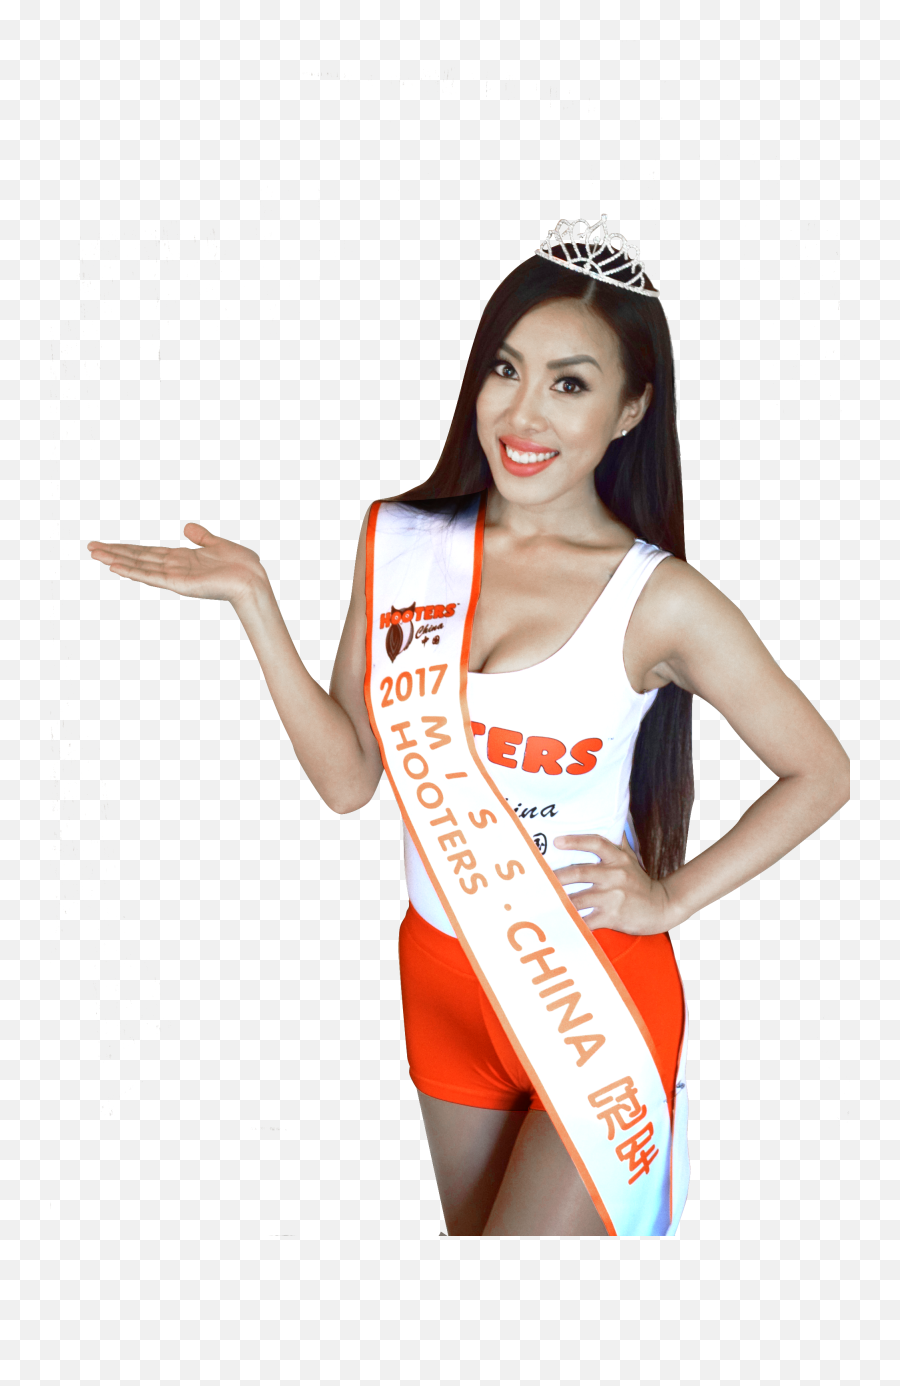 Download Hooters Png Transparent - Girl,Hooters Logo Png